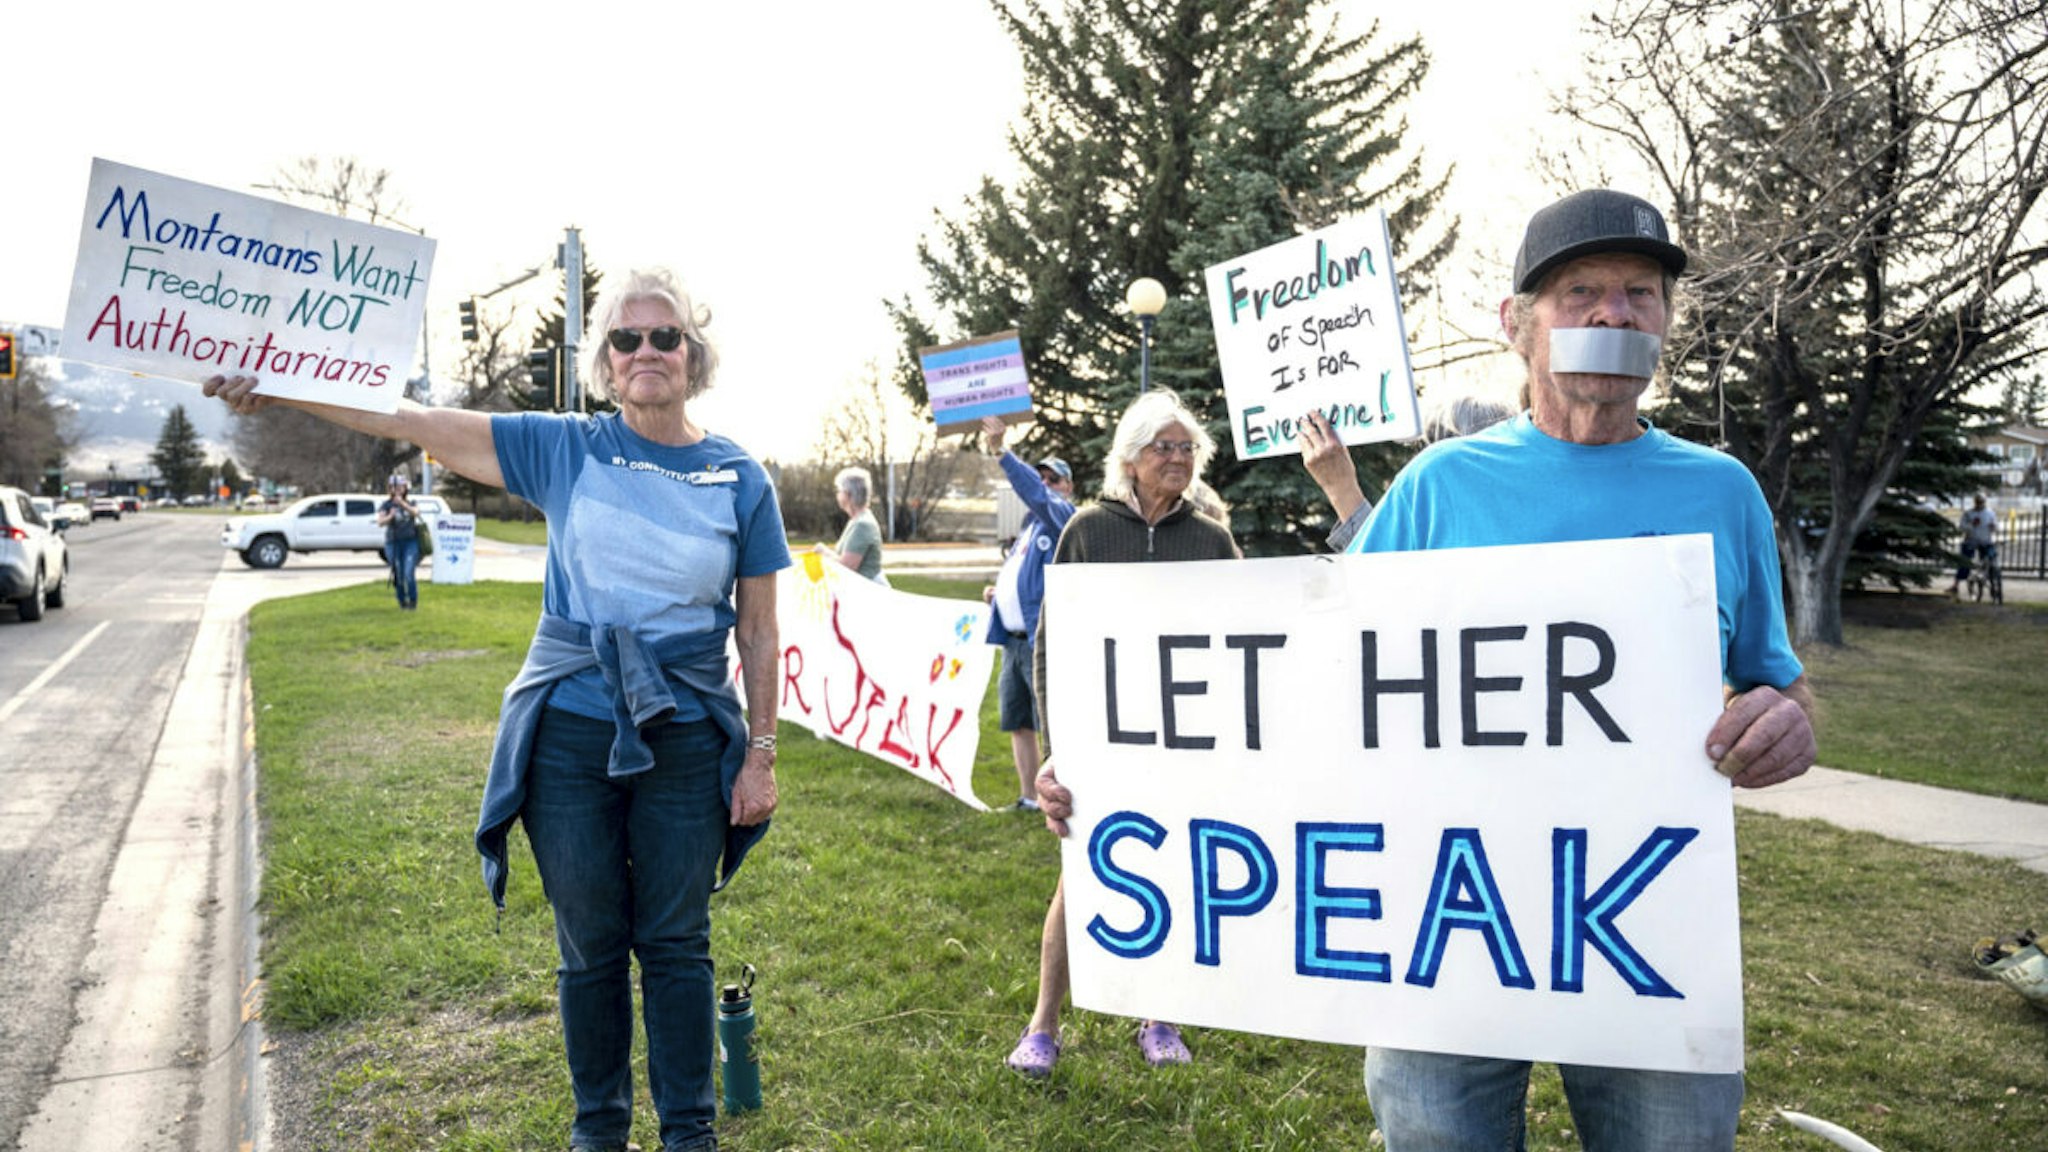 Supporters hold signs near a rally in support of transgender lawmaker Zooey Zephyr on April 29, 2023 in Livingston, Montana. Zephyr was banned from the floor of the Montana legislature after speaking out against an anti-transgender bill.